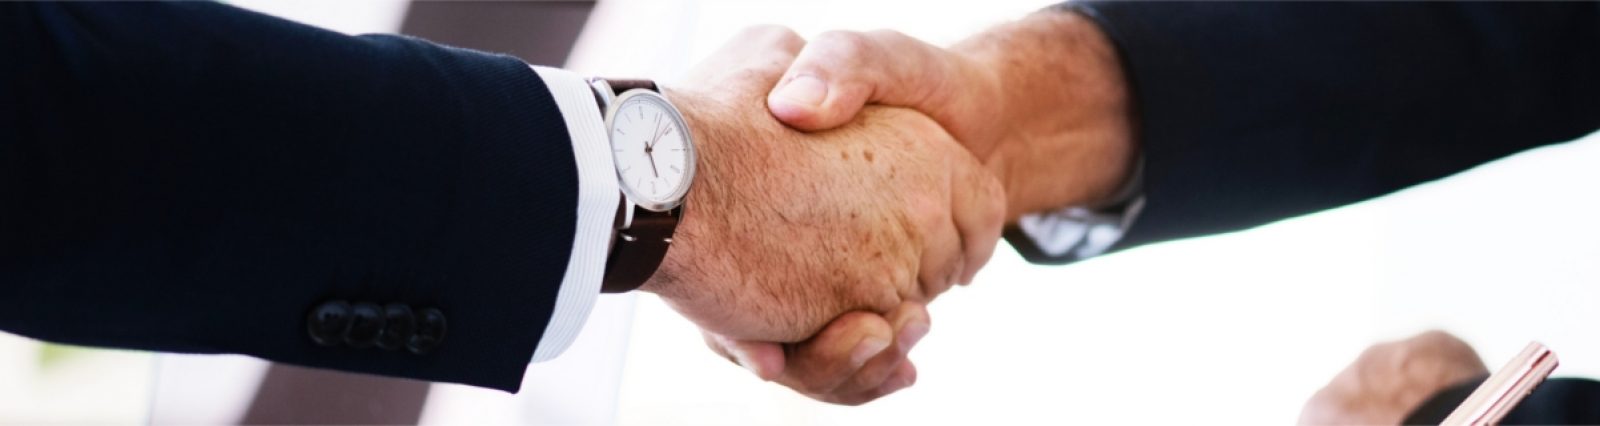 Banking is Personal - Two men shaking hands